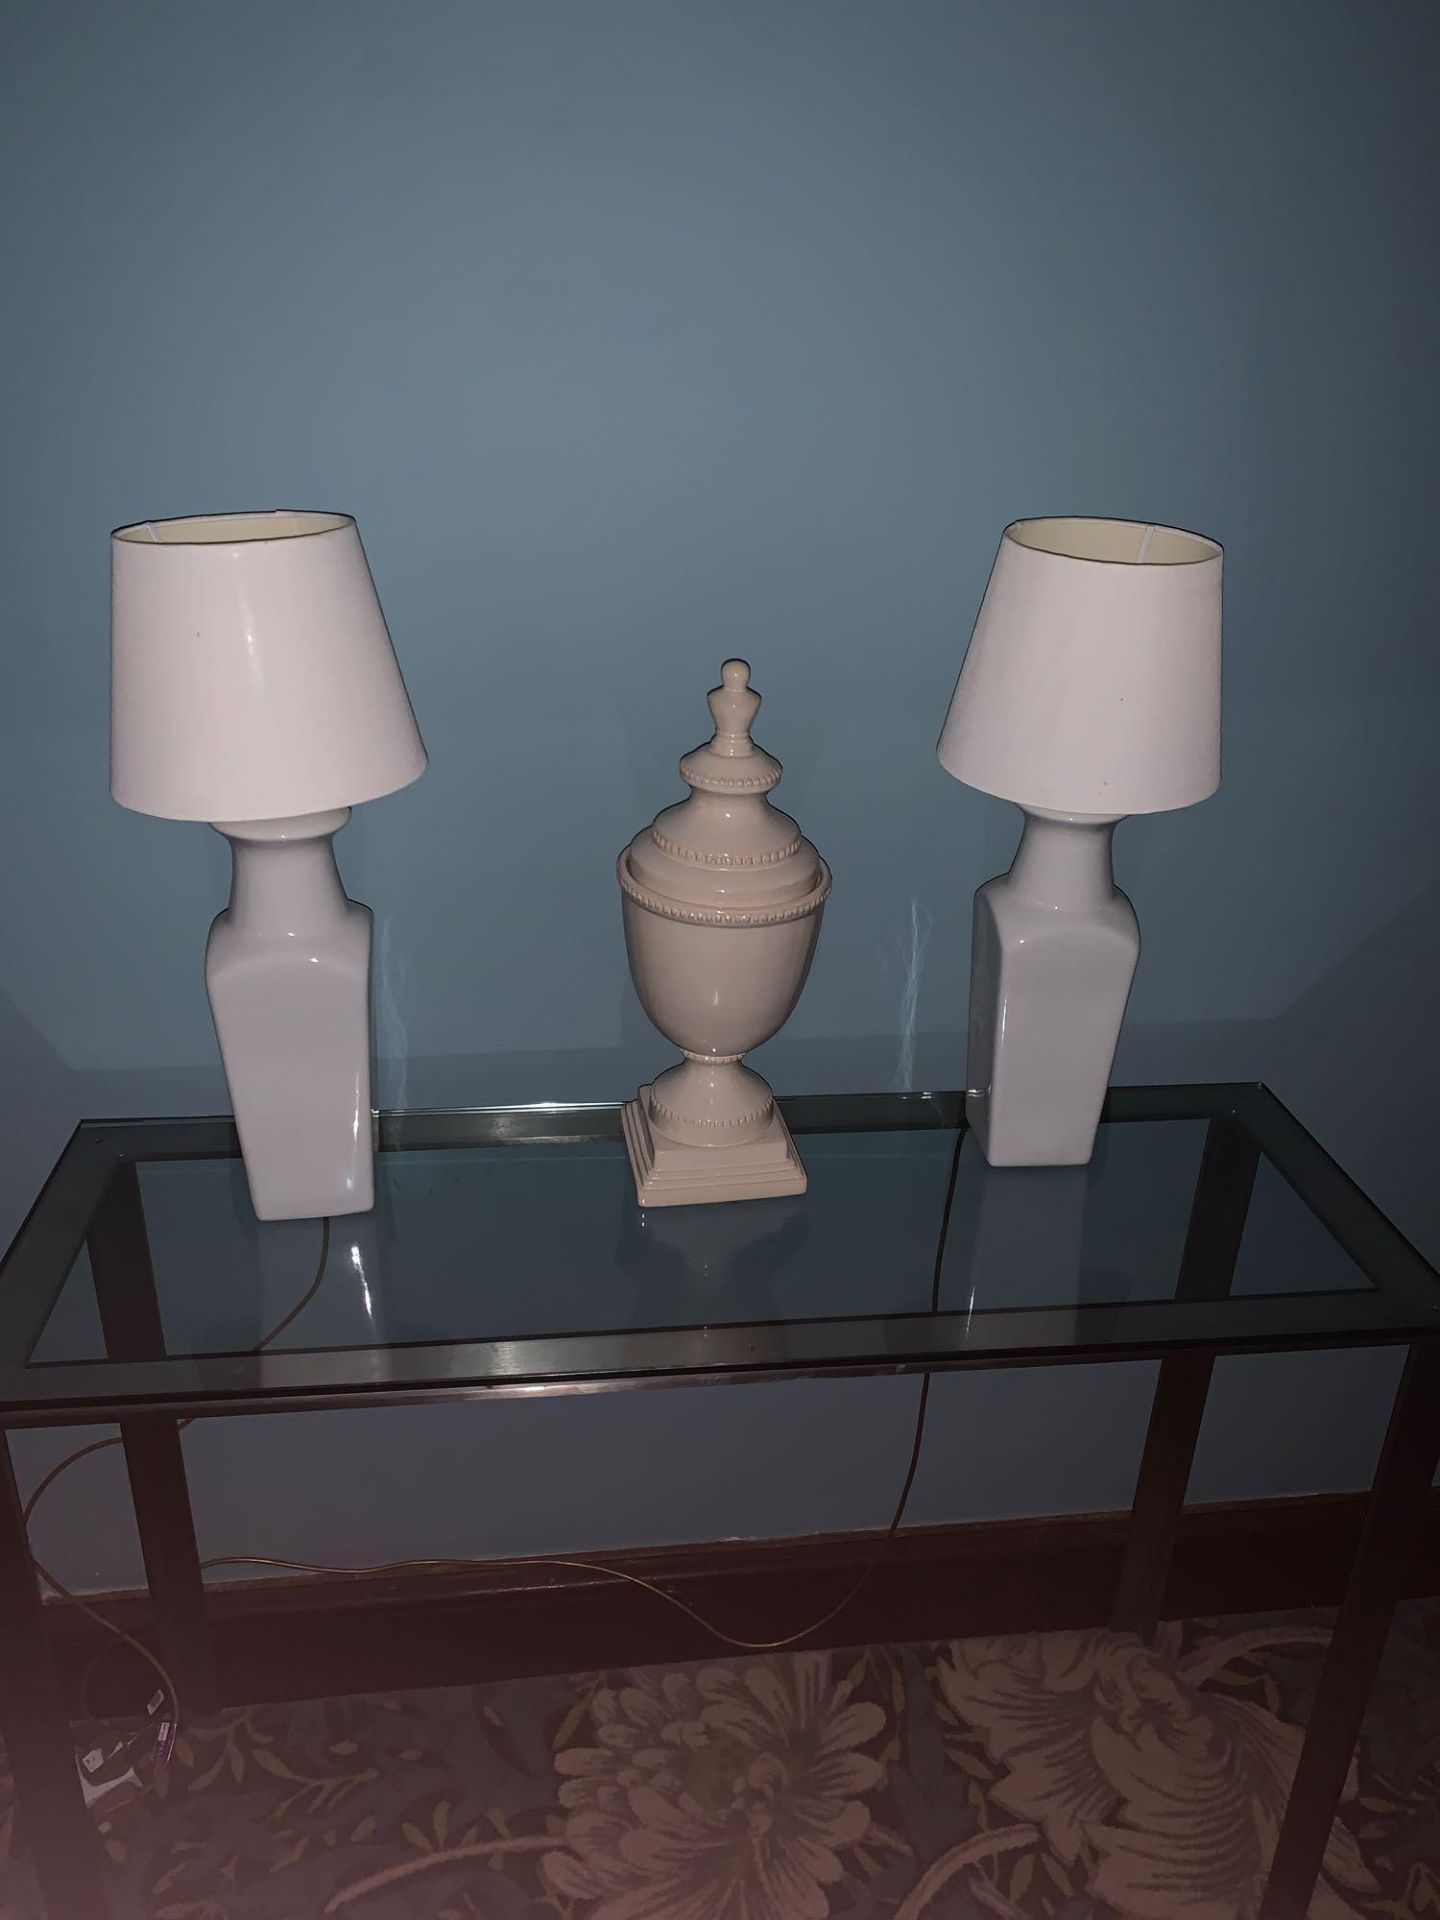 A Pair Of White Ceramic Table Lamps And A Ceramic Urn 60cm